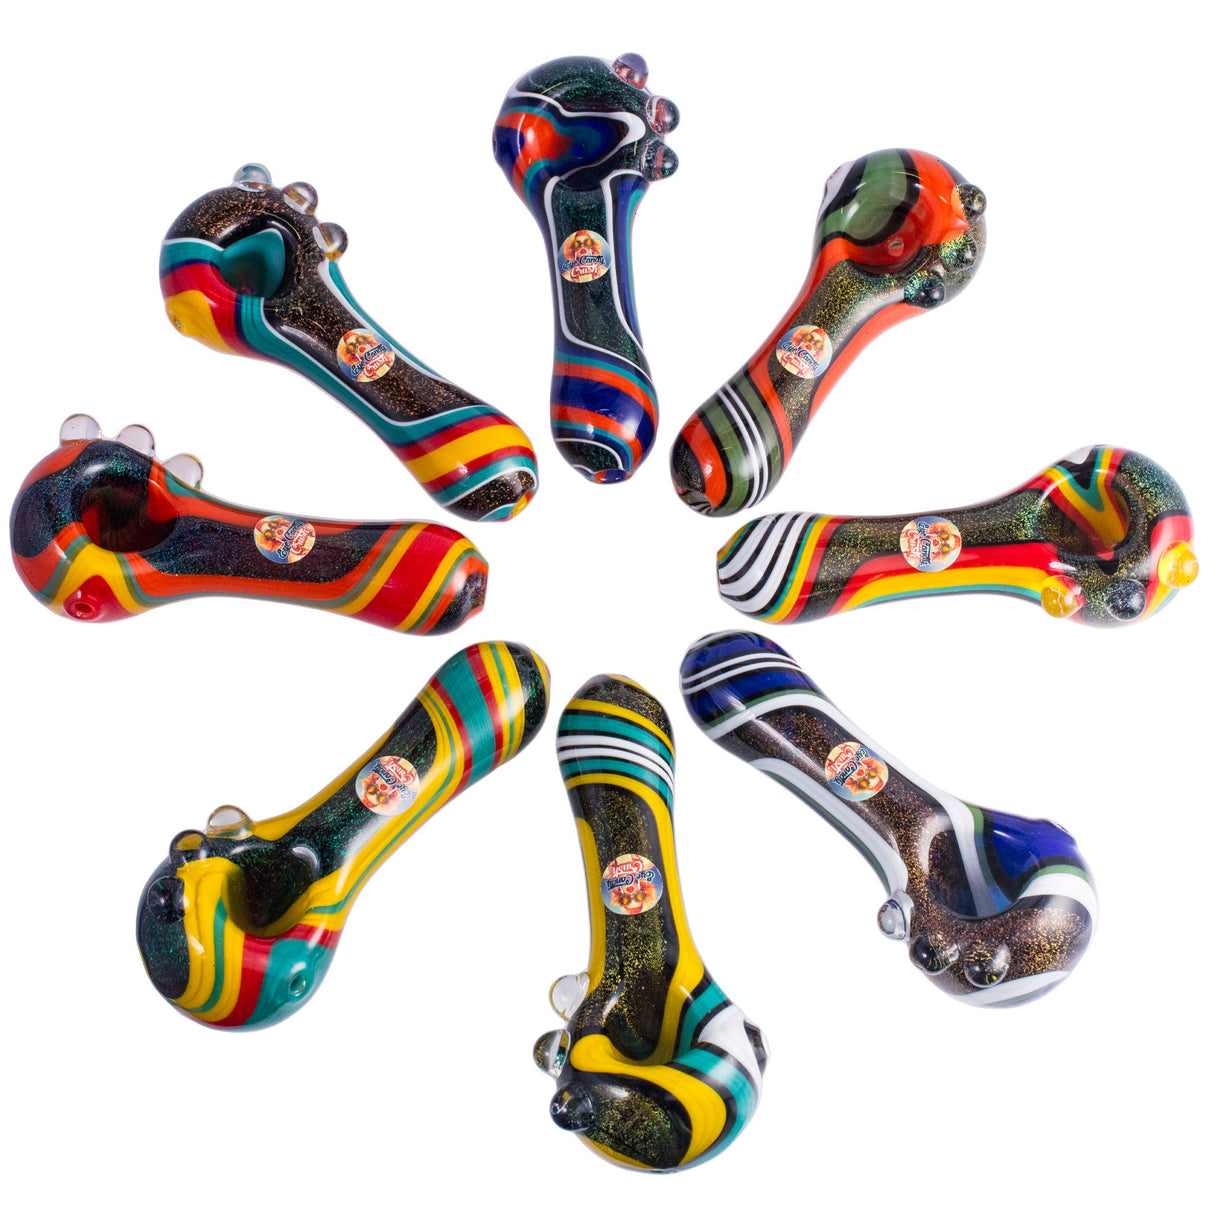 Variety of Crush Dichroic Glass Spoon Pipes with Colorful Grip Bumps 4" on white background